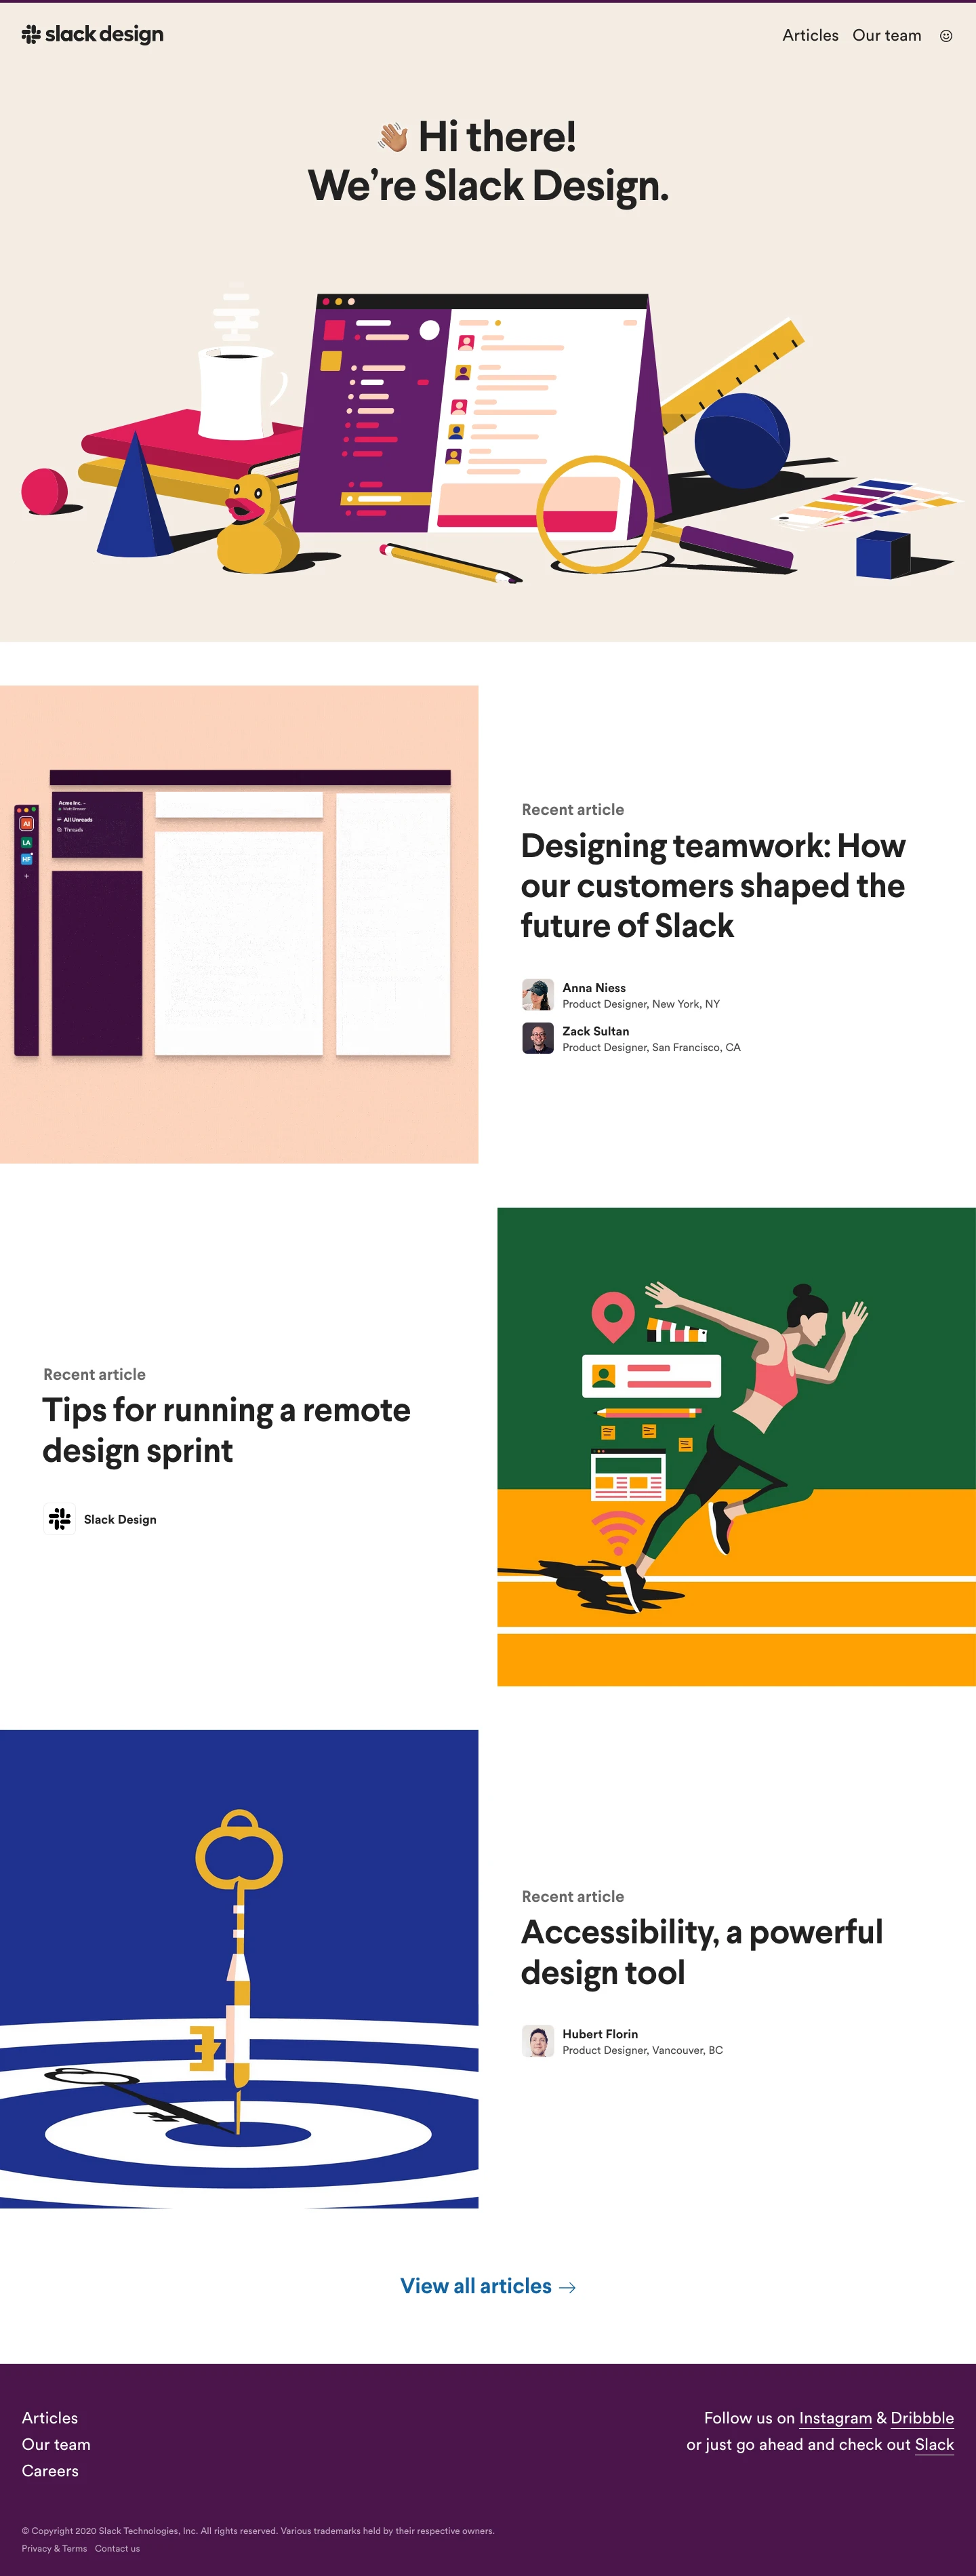 Slack Design Landing Page Example: A collection of articles and resources from the design team at Slack.